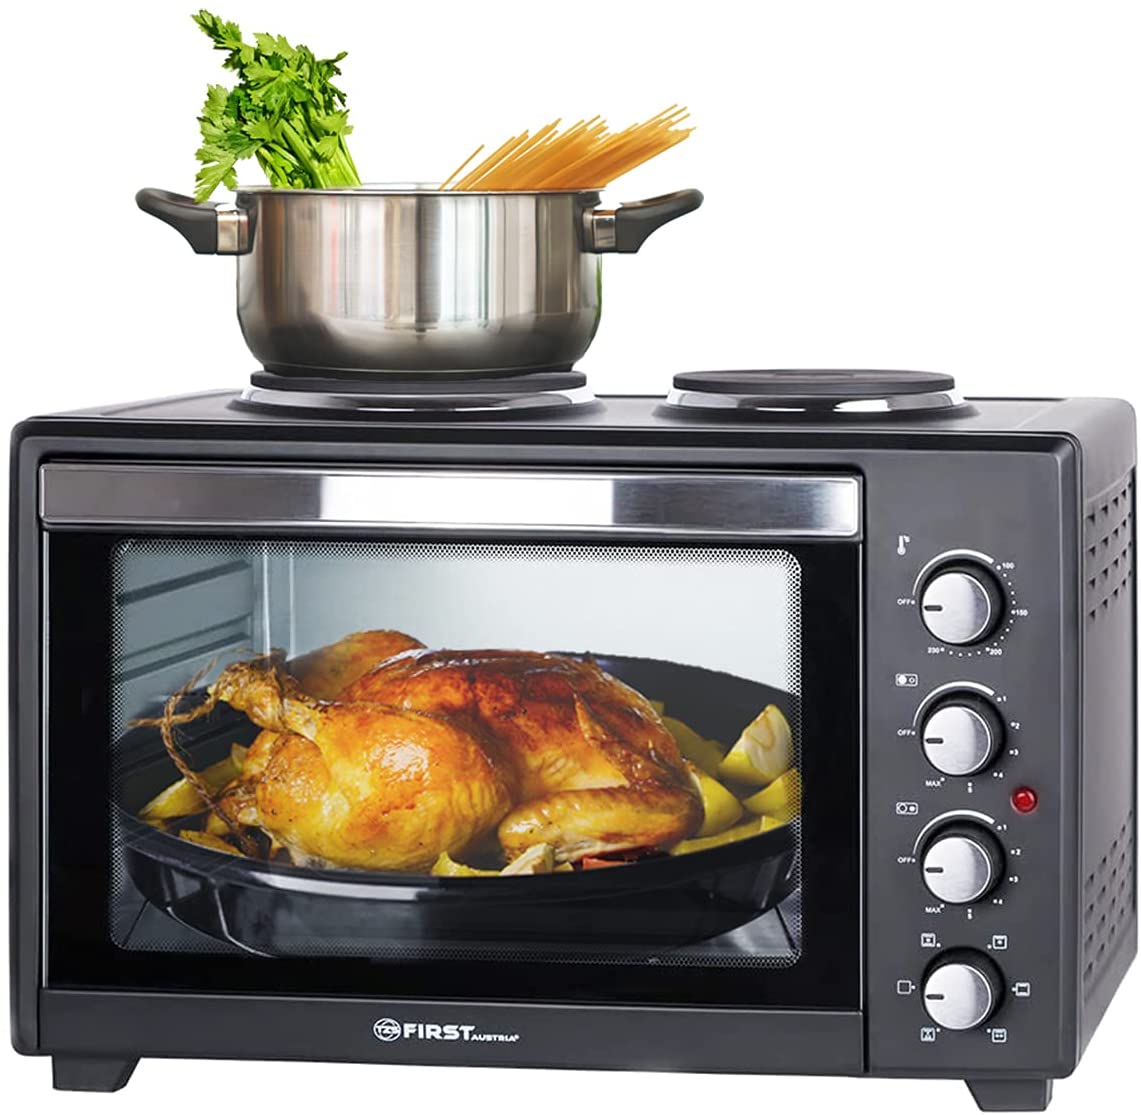 TZS First Austria - 45 Litre 3200 Watt Mini Oven with Hobs and Crumb Plate Rotisserie and Circulation Mini Pizza Oven Mini Kitchen Can be Used Separately Cooking and Baking at the same time